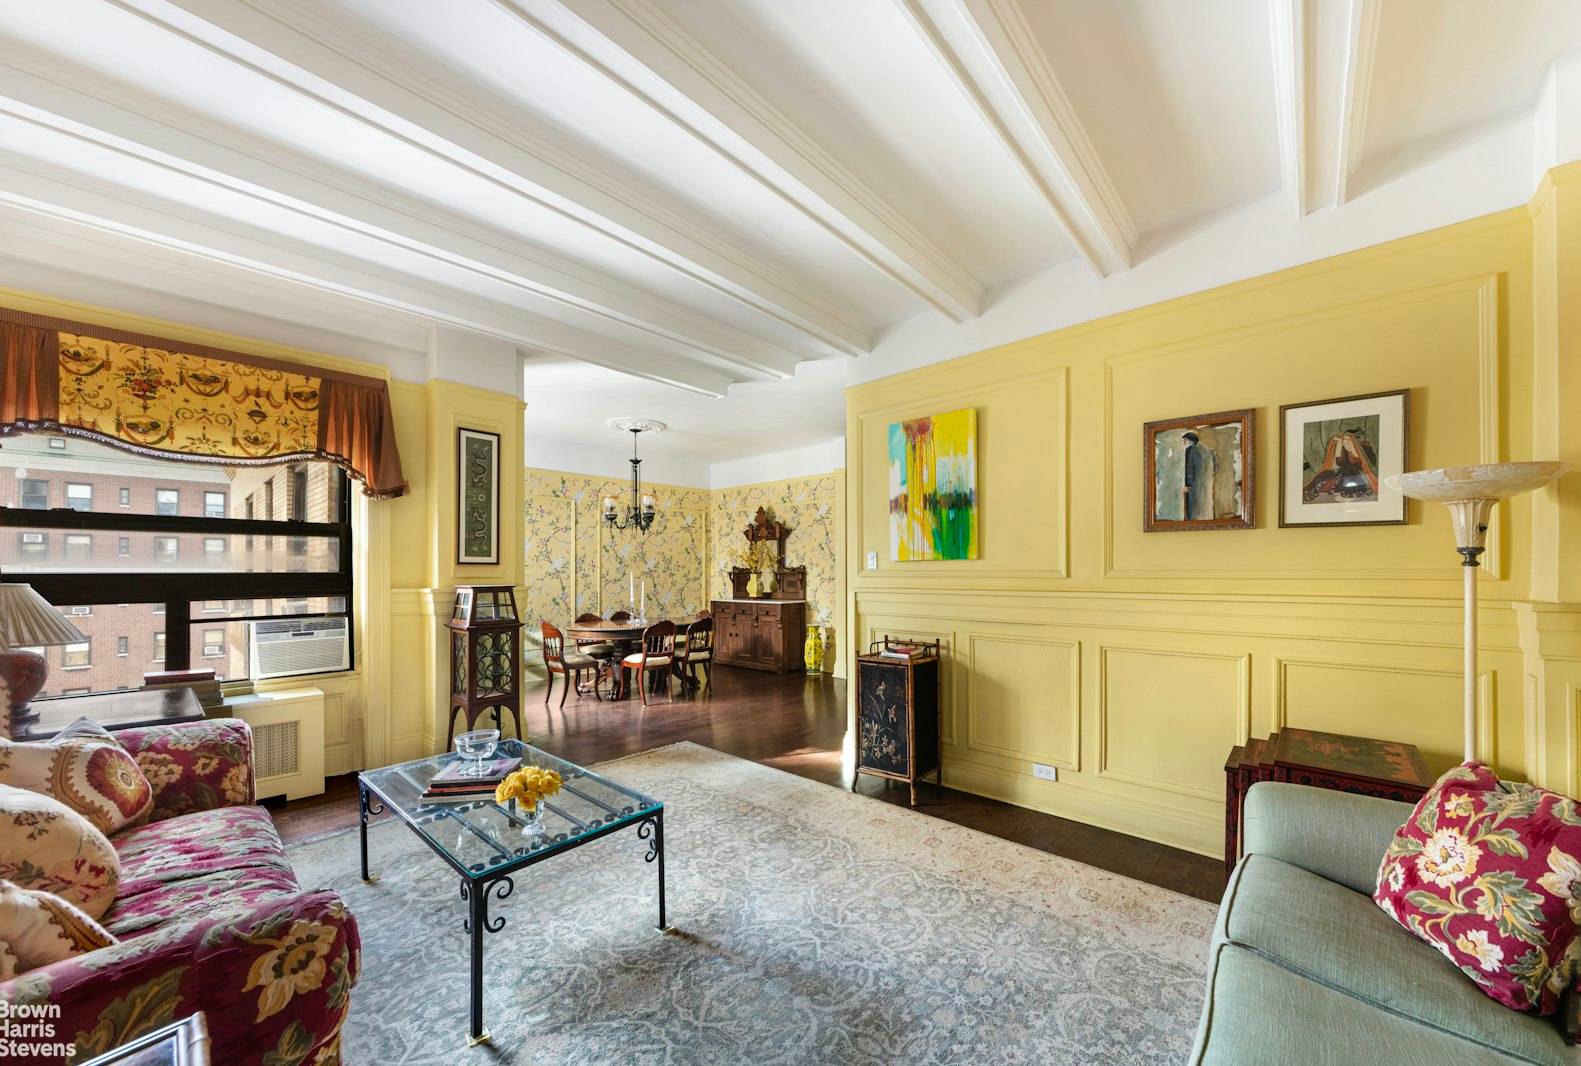 Experience the epitome of Upper West Side luxury in this exceptional home at The Admaston, the premier Prewar Condo in the area.